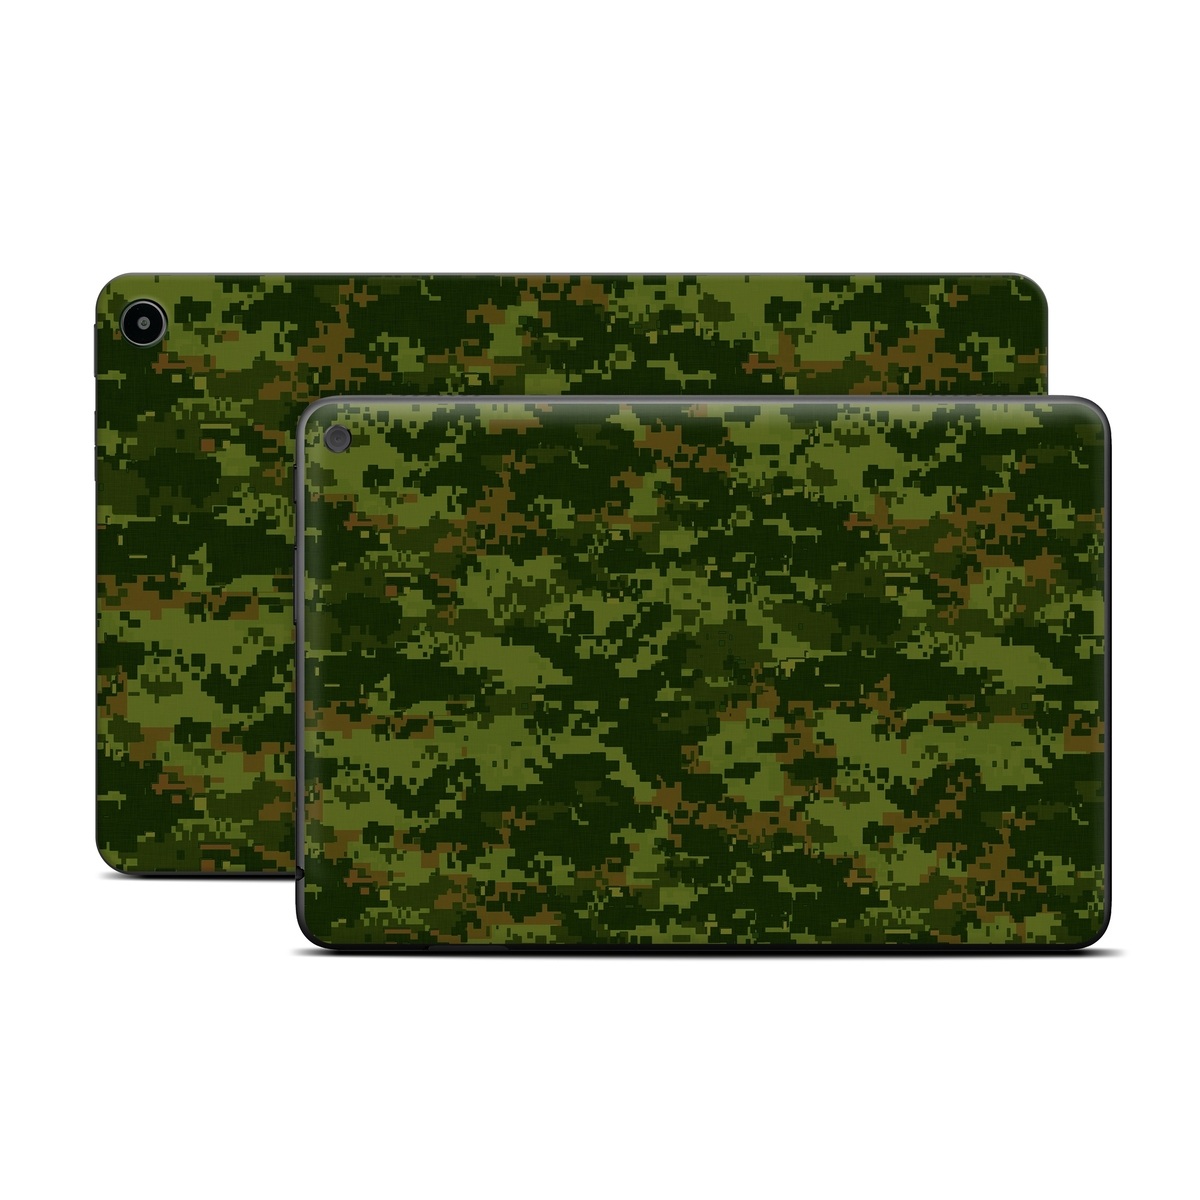 Amazon Fire Tablet Series Skin Skin design of Military camouflage, Green, Pattern, Uniform, Camouflage, Clothing, Design, Leaf, Plant, with green, brown colors